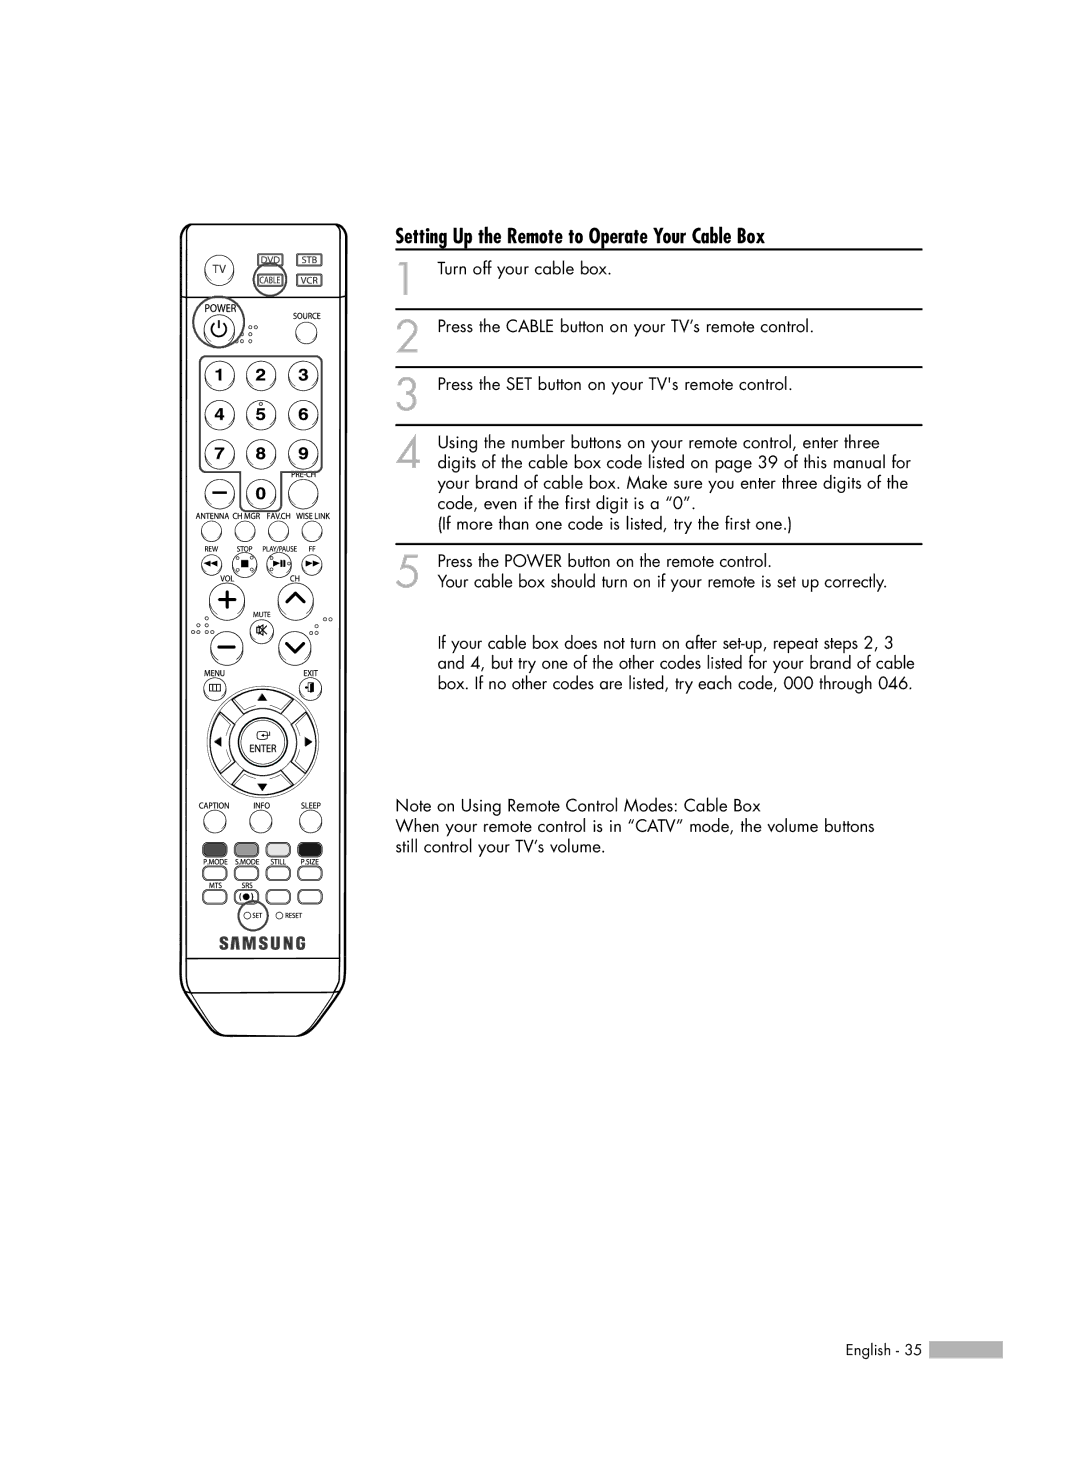 Samsung HL-S5666W, HL-S6166W, HL-S5066W, HL-S4666W manual Setting Up the Remote to Operate Your Cable Box 